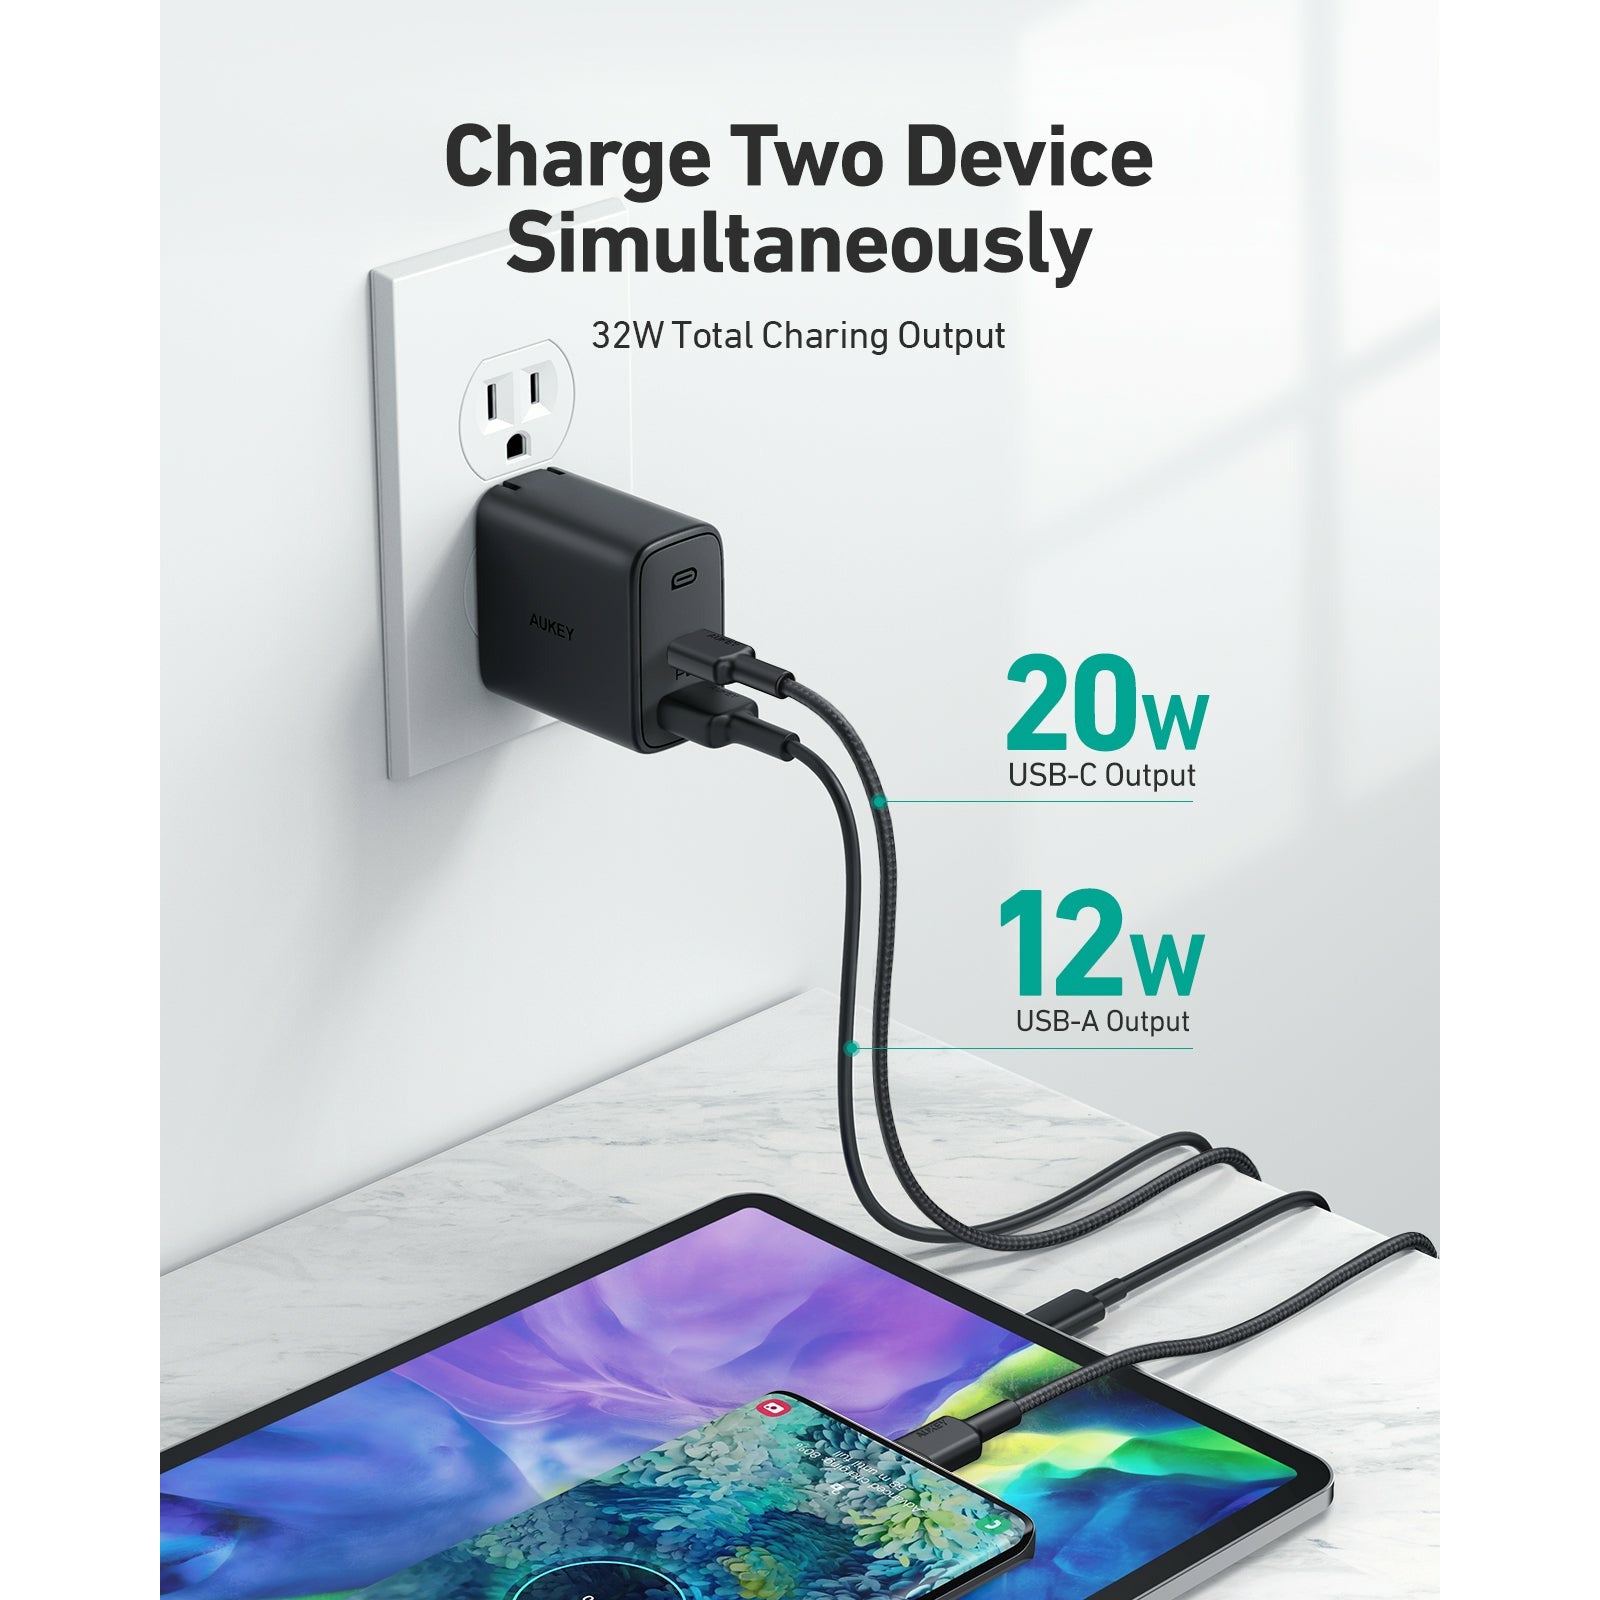 AUKEY PA-F3S Swift Charger Mix 32W Dual-Port Cube Plug Power with Cable